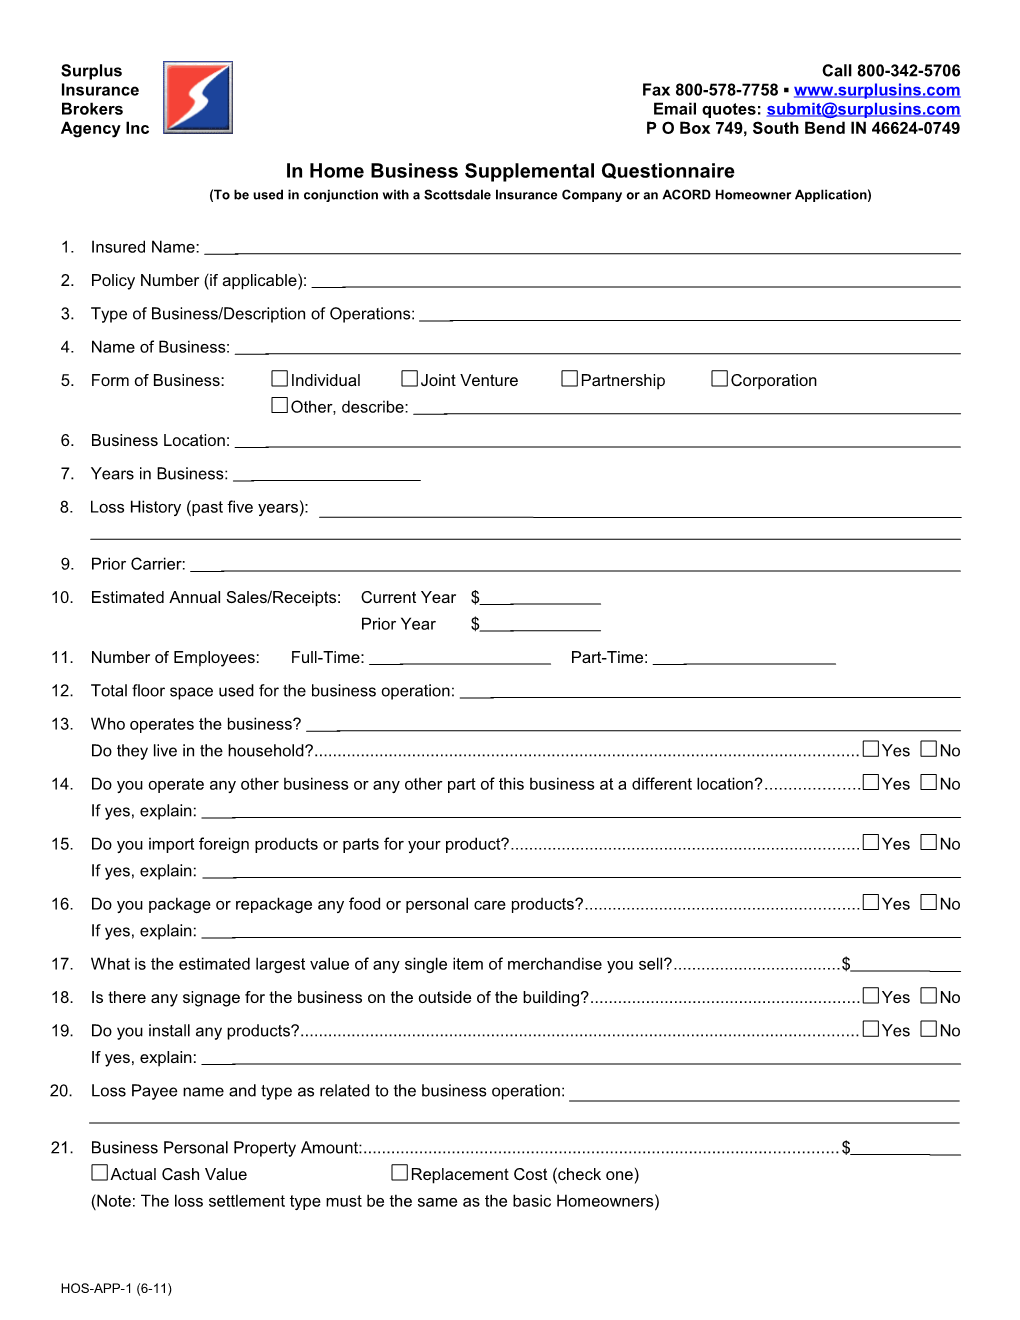 In Home Business Supplemental Questionnaire